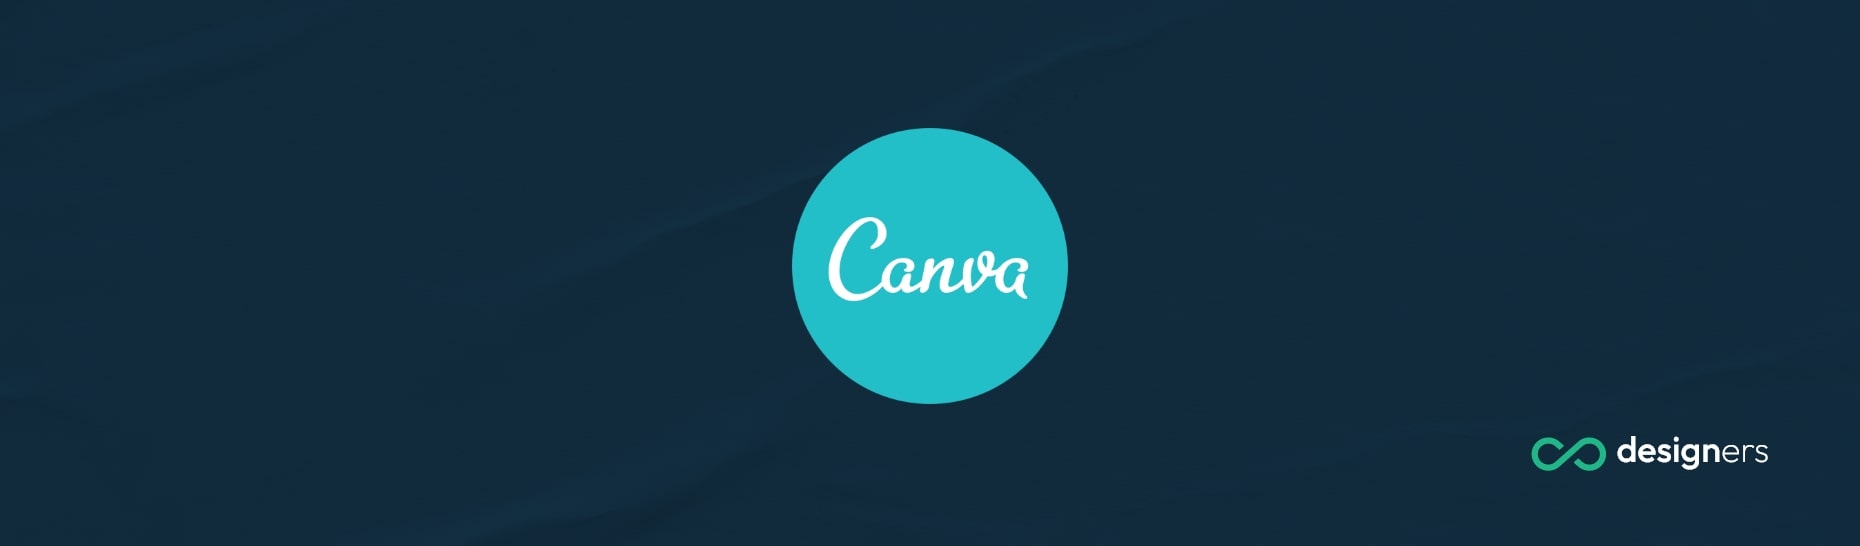 How Do I Make Rounded Corners in Canva? 